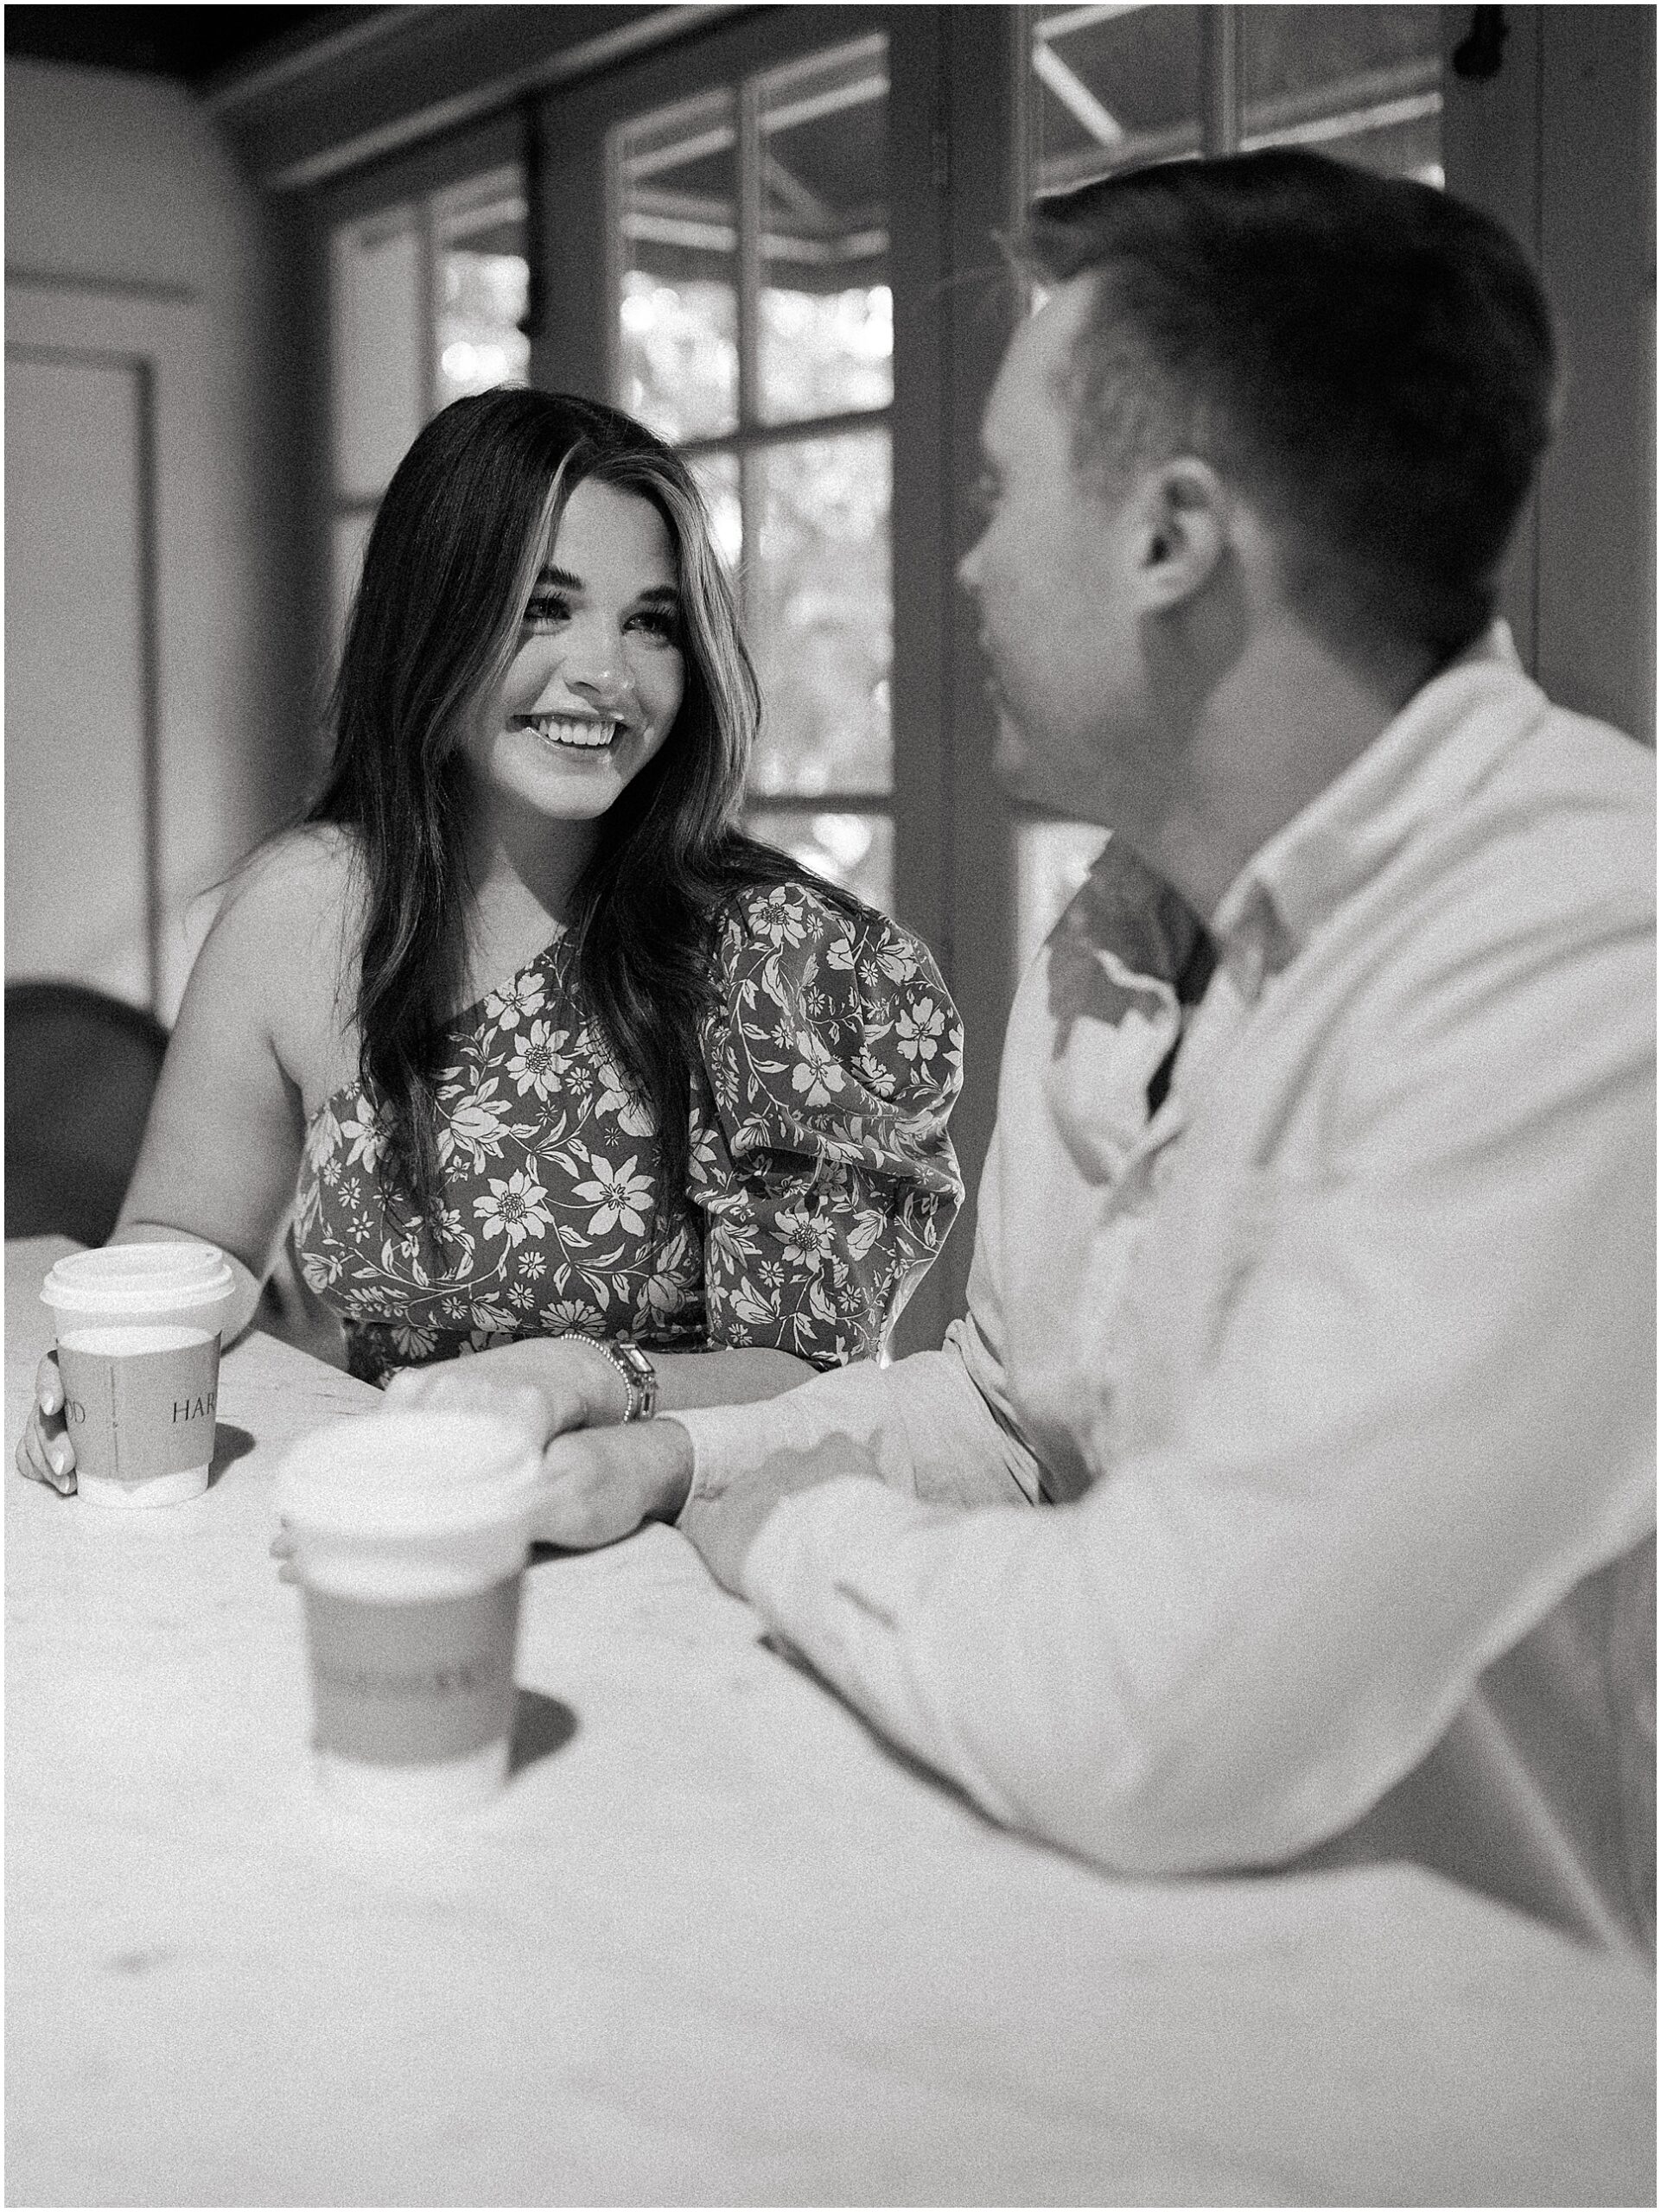 Catherine and Jack's Engagement Session Starts in a Cozy Coffee Shop